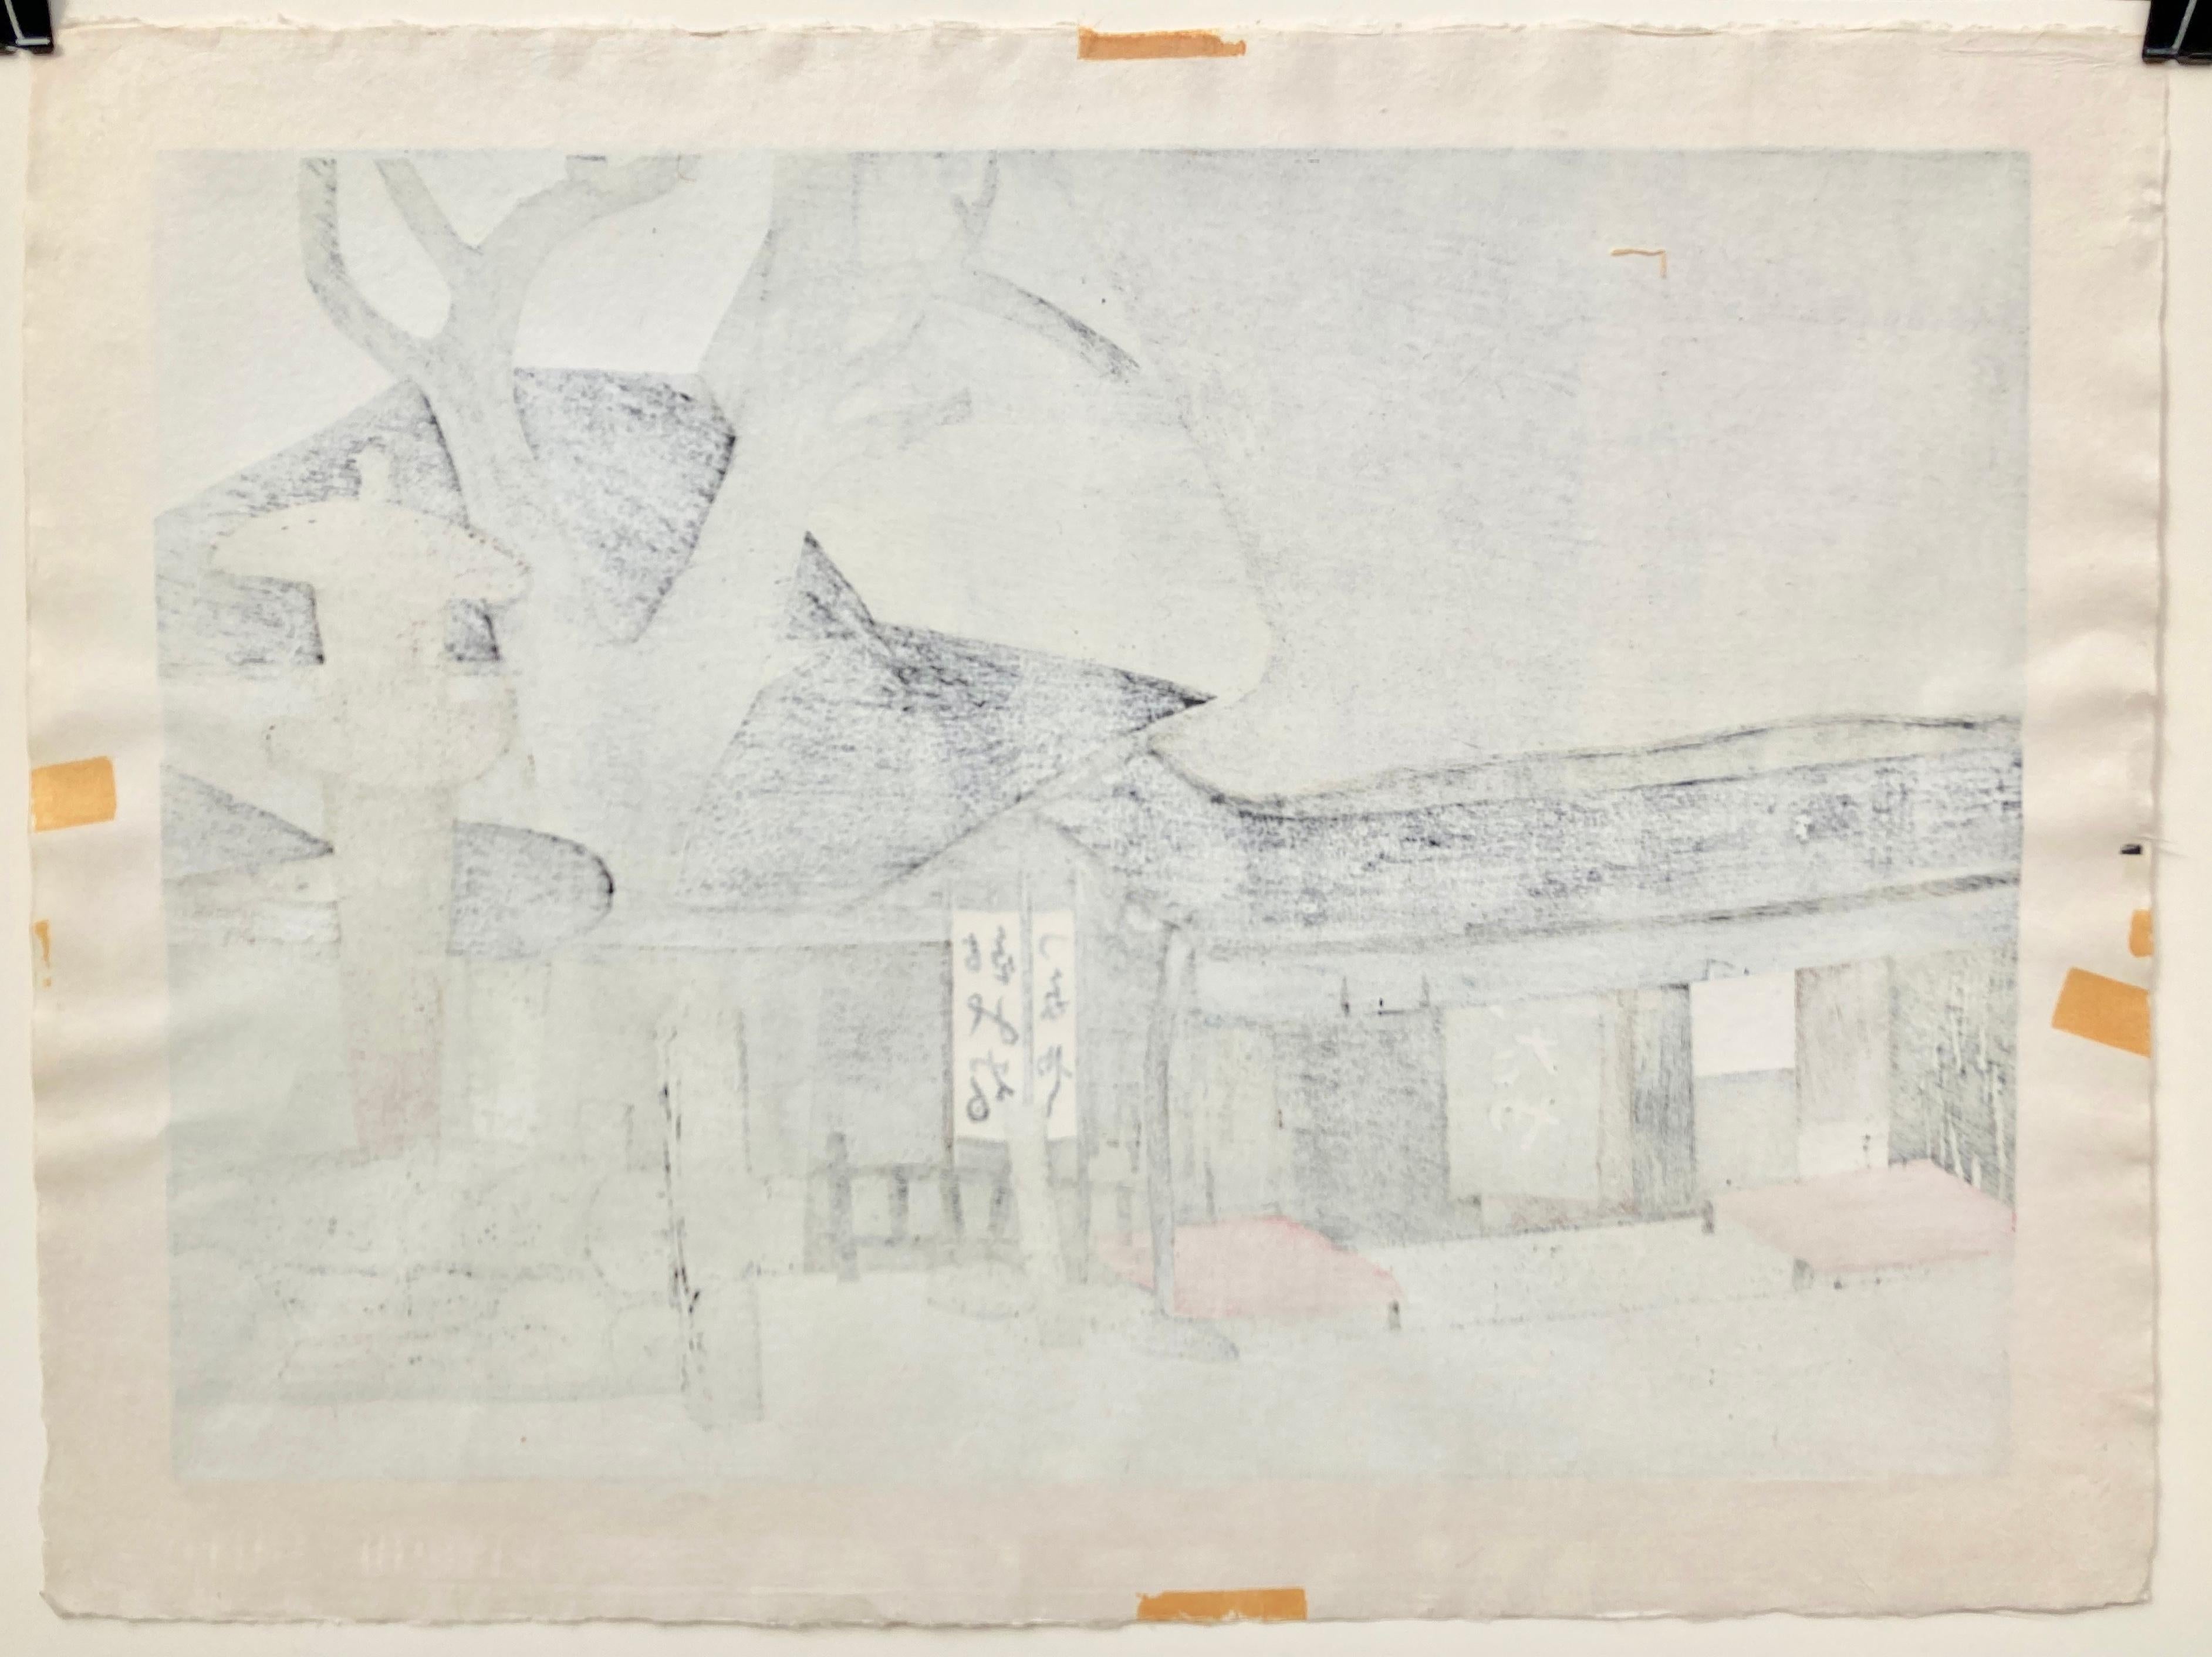 KIYOSHI SAITO (Japanese 1907 - 1997)

KYOTO (B) 1966
Color woodcut, signed, titled, dated and no. 5/100 in pencil. Edition 100. Image 14 3/4 x 20 5/8 inches. Full margins with deckle edges. Good rich impression. Remnants of tape stain on verso sheet